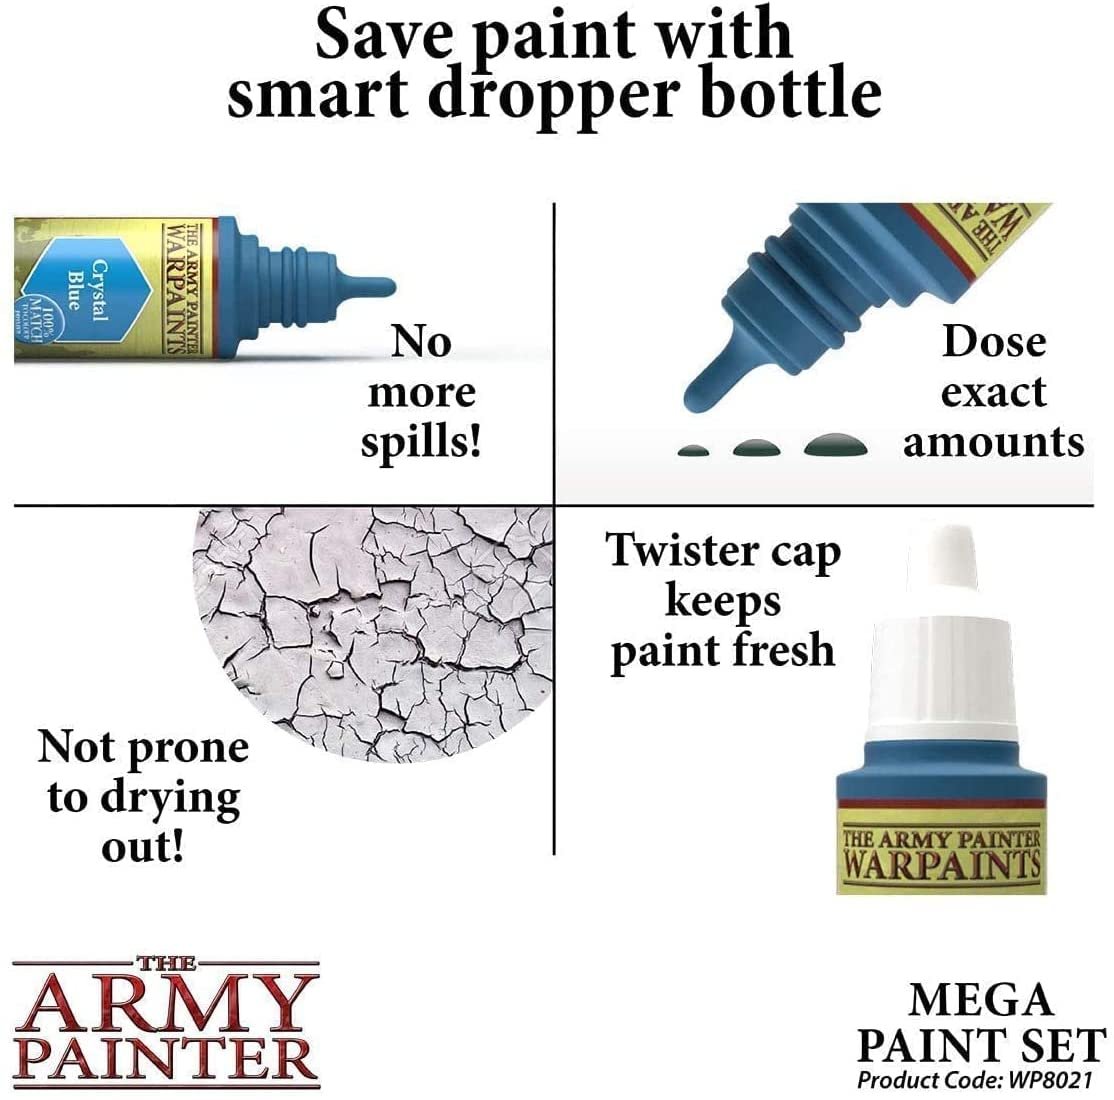 The Army Painter: Paint Sets 